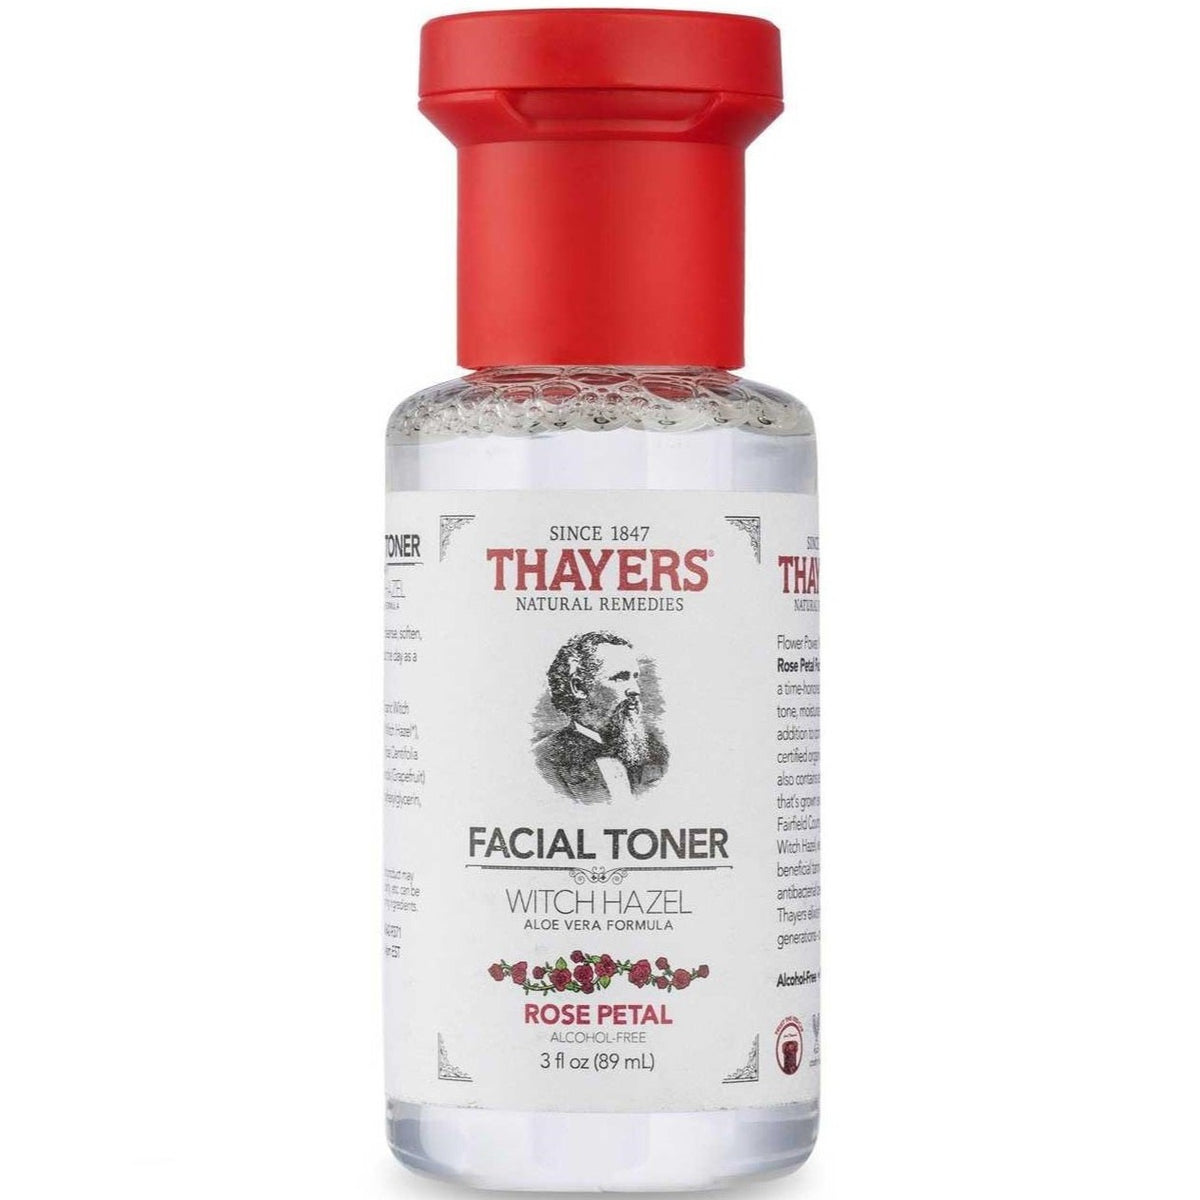 THAYERS Alcohol-Free Witch Hazel Facial Toner with Rose Petals 89ml Personal Care at Village Vitamin Store